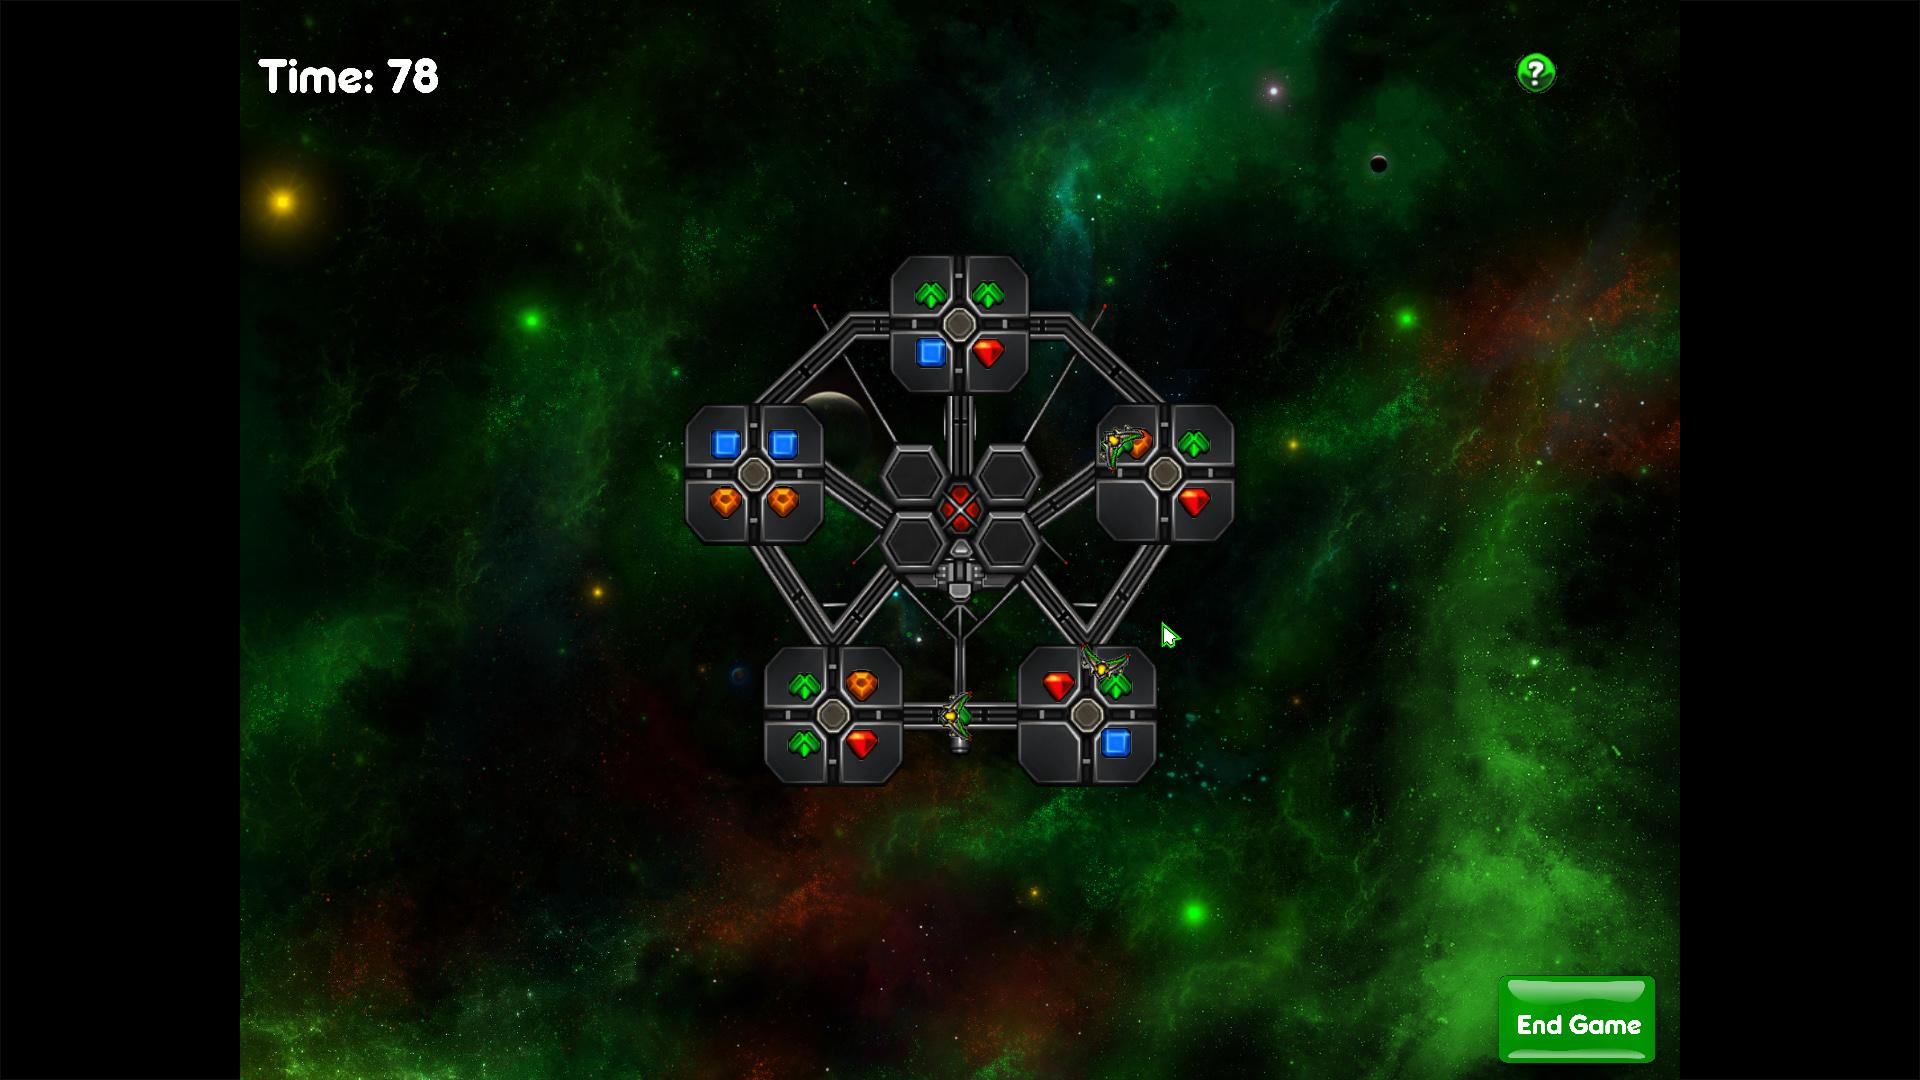 Screenshot №2 from game Puzzle Galaxies